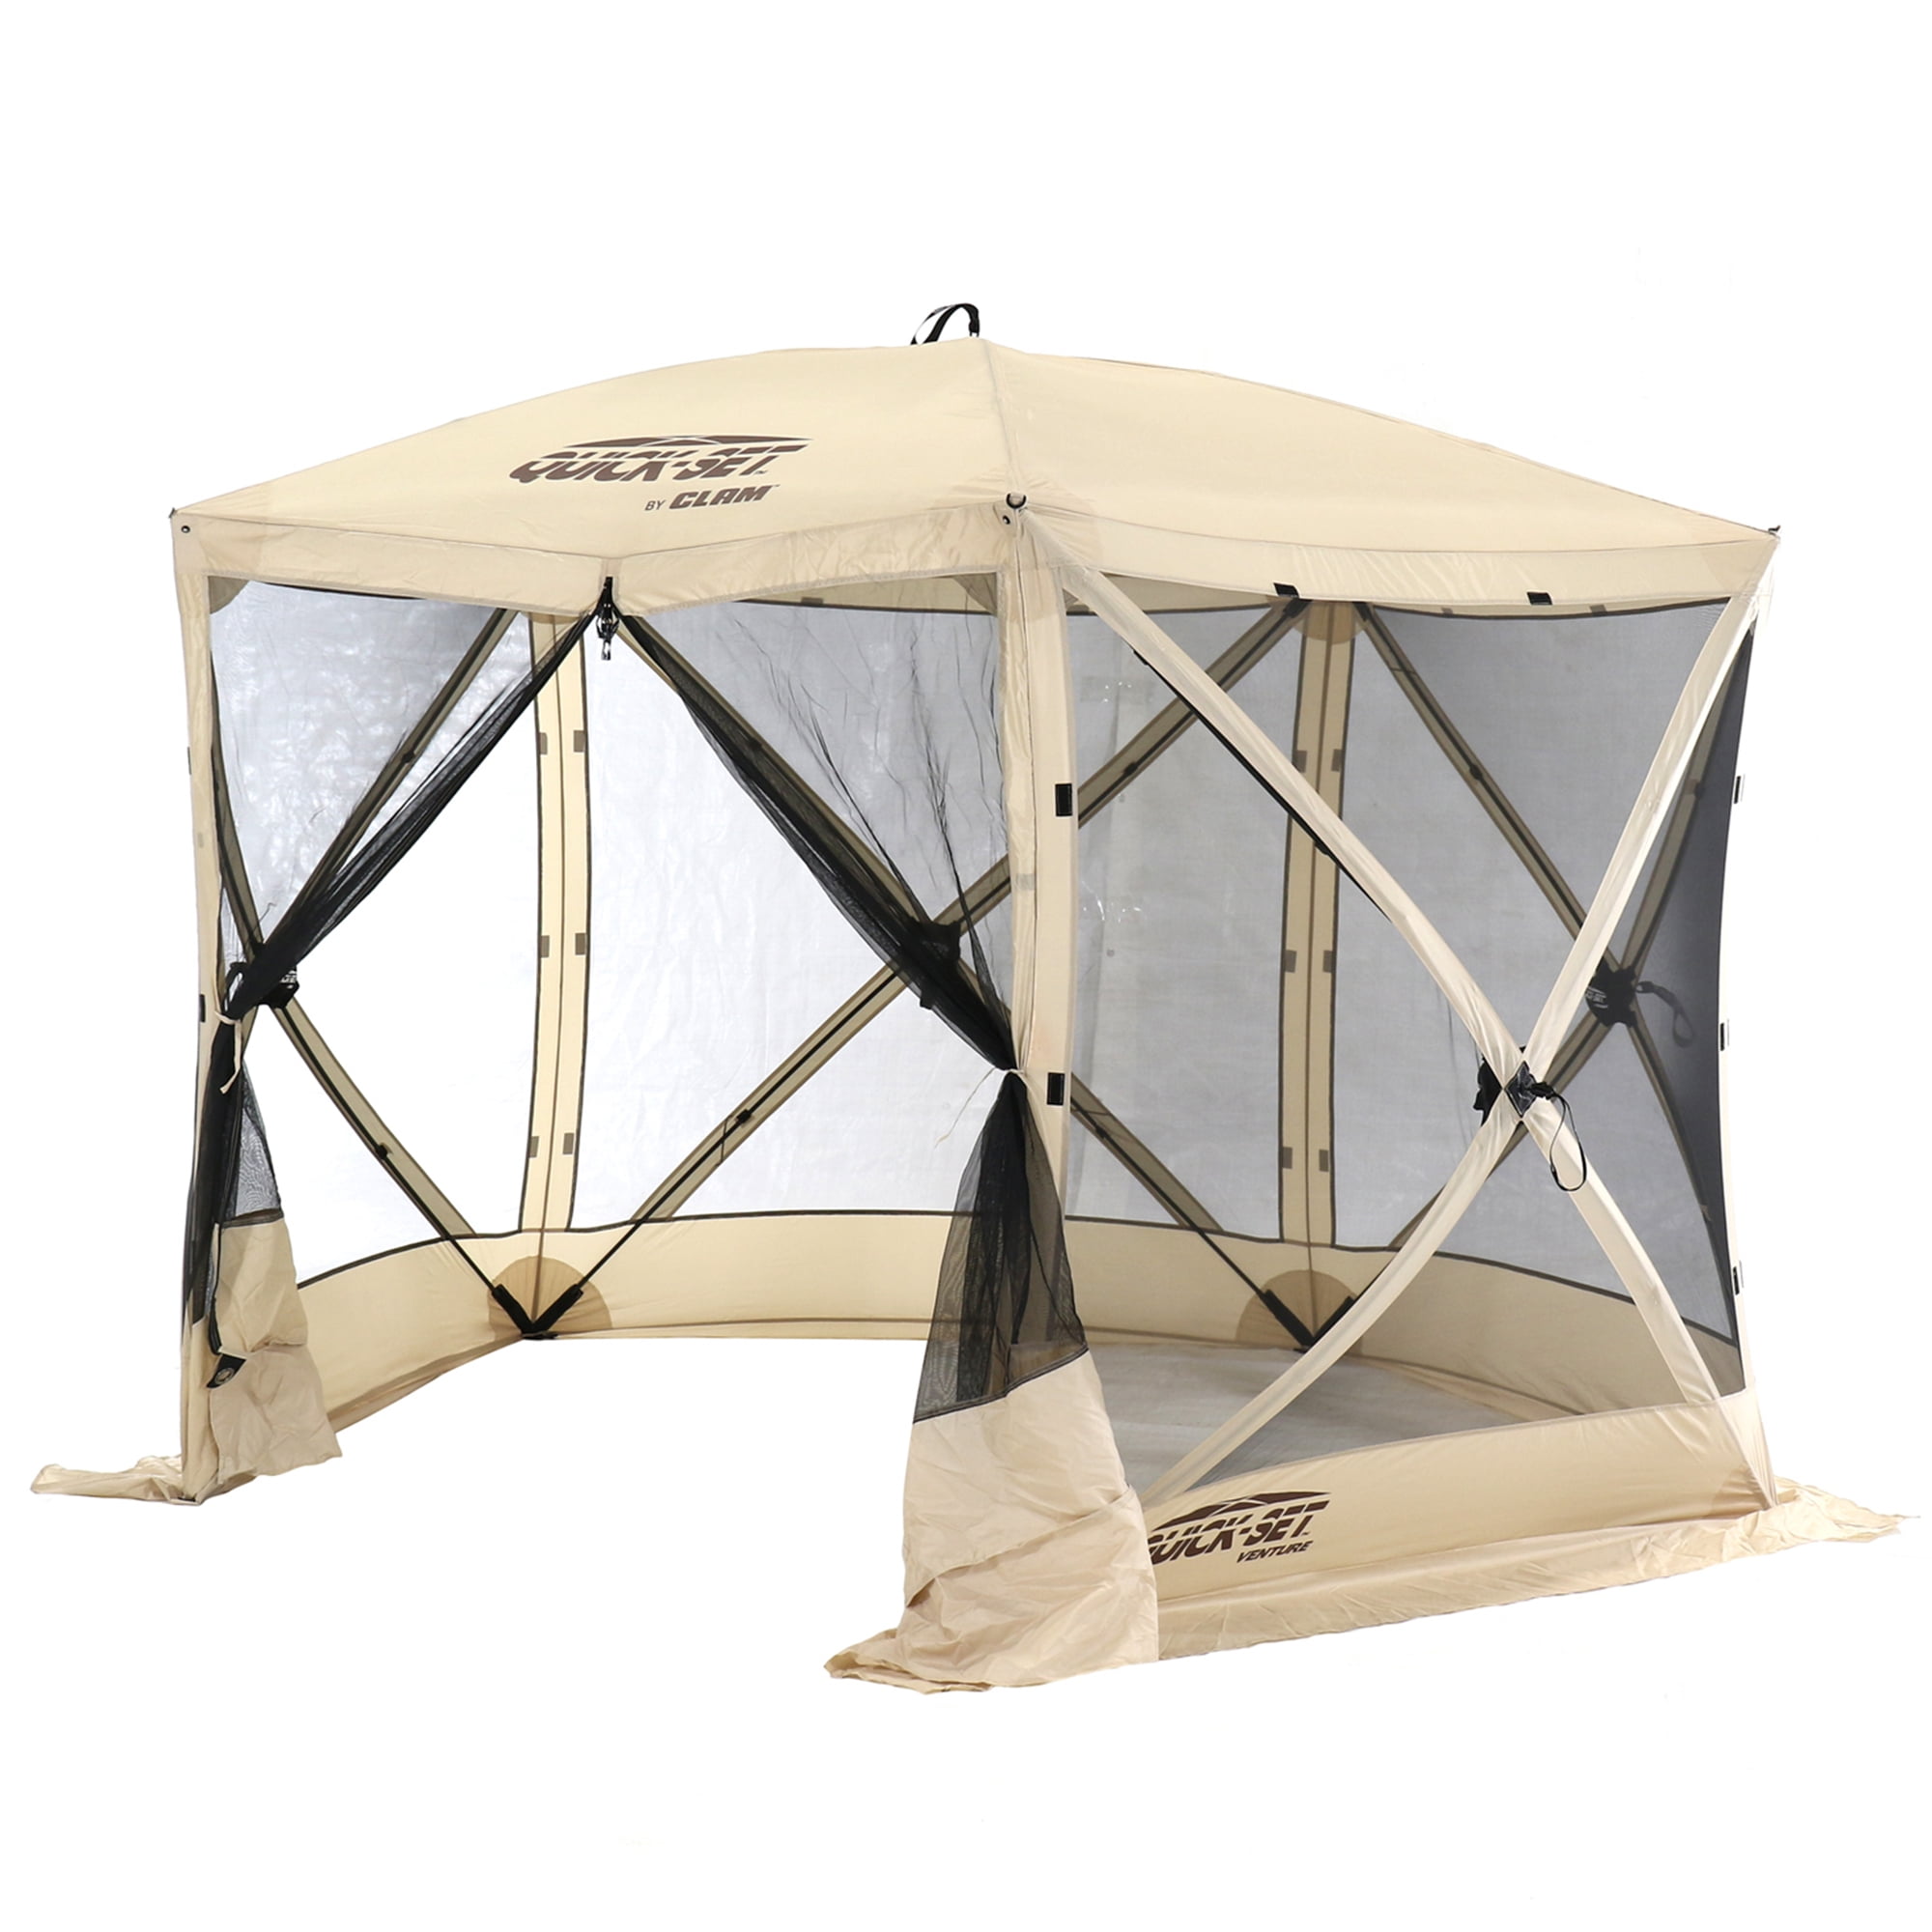 CLAM Quick-Set 9 x 9 Foot Venture Portable Outdoor Canopy Shelter, Tan